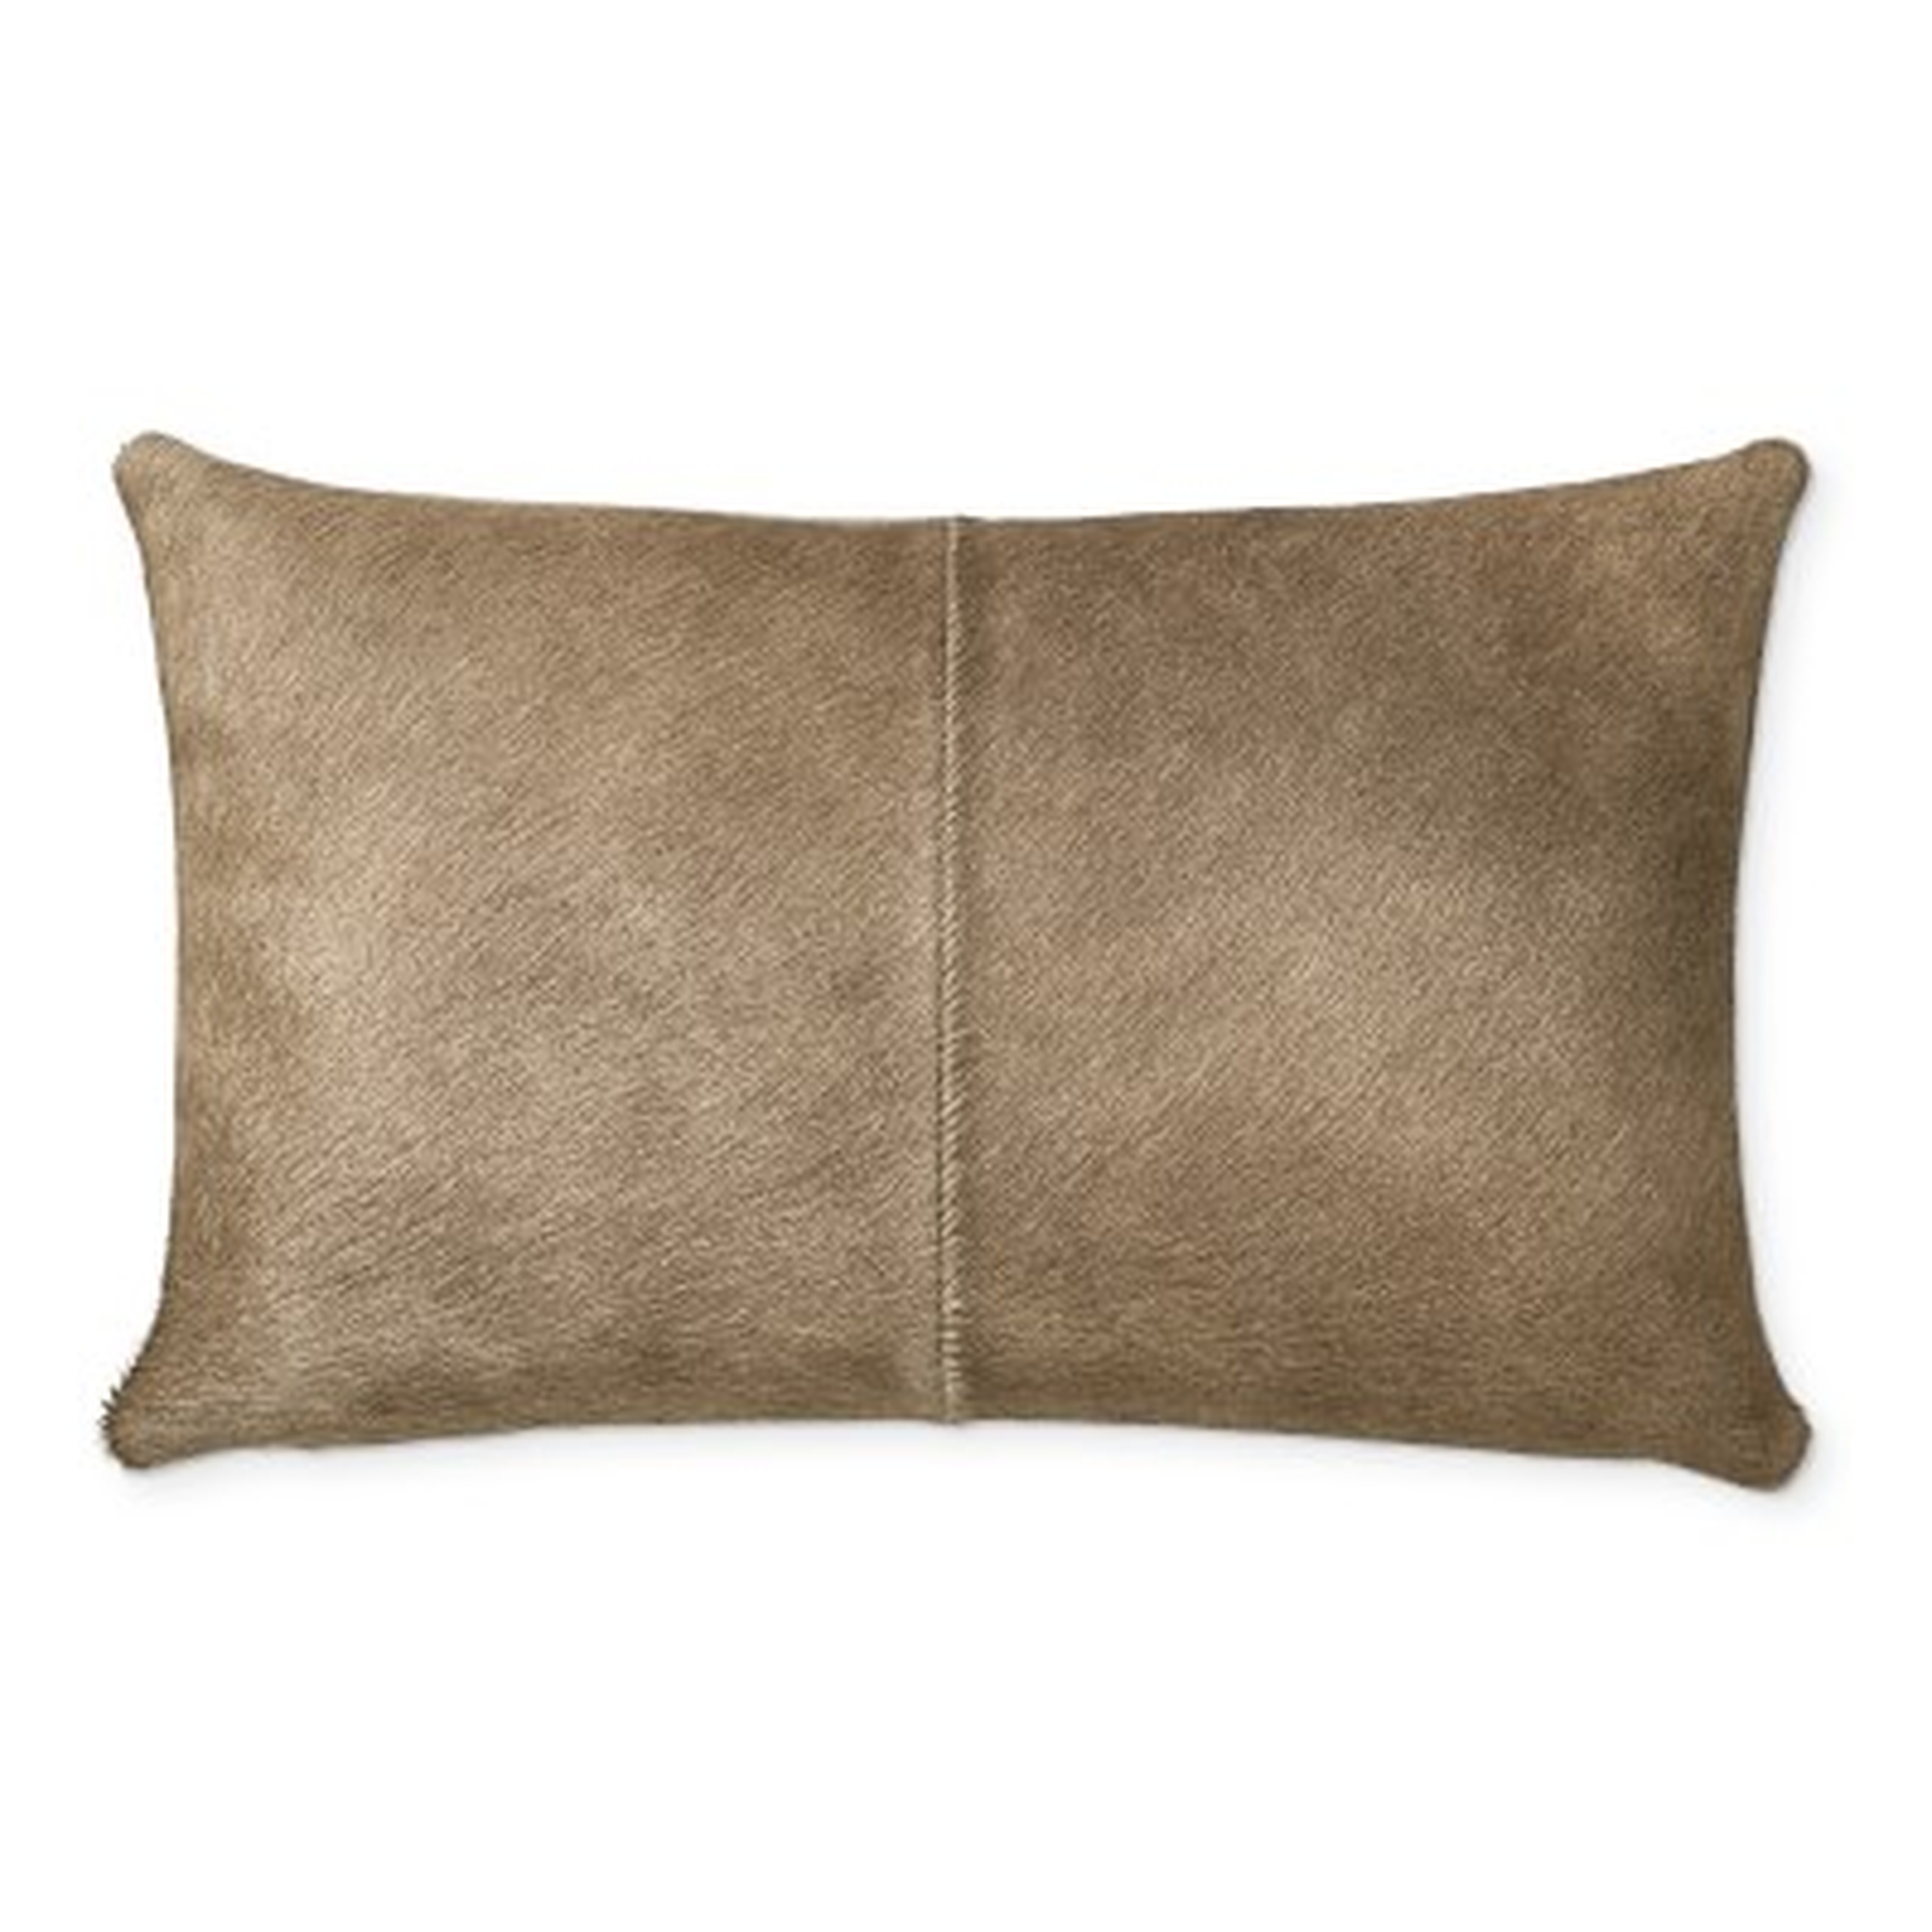 Solid Hide Lumbar Pillow Cover, 14" X 22", Brown - Williams Sonoma